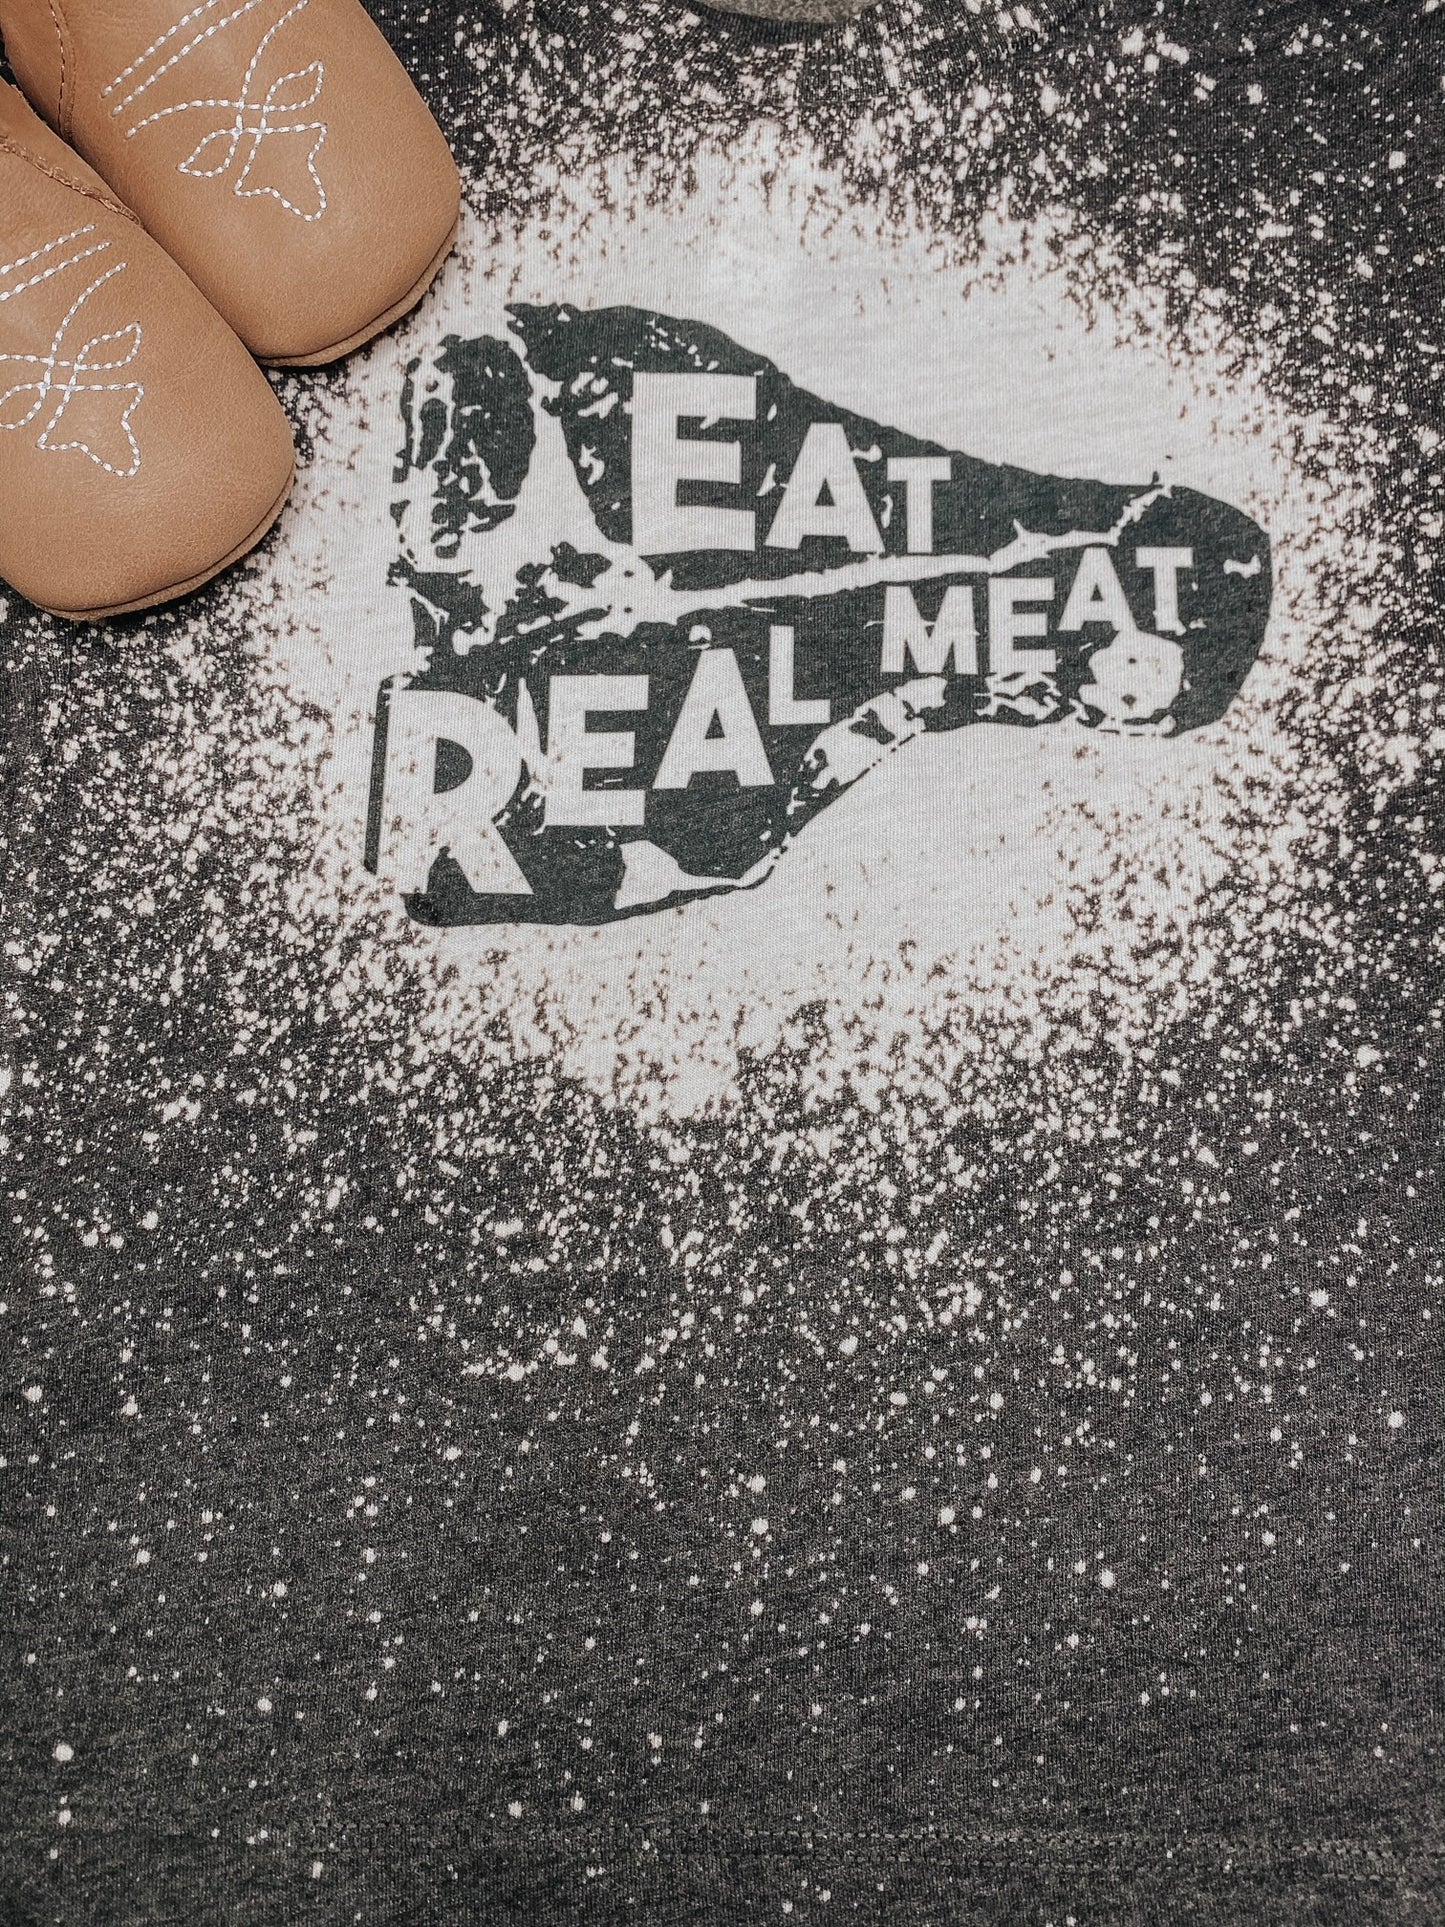 the Eat |Real| Beef bleached tee